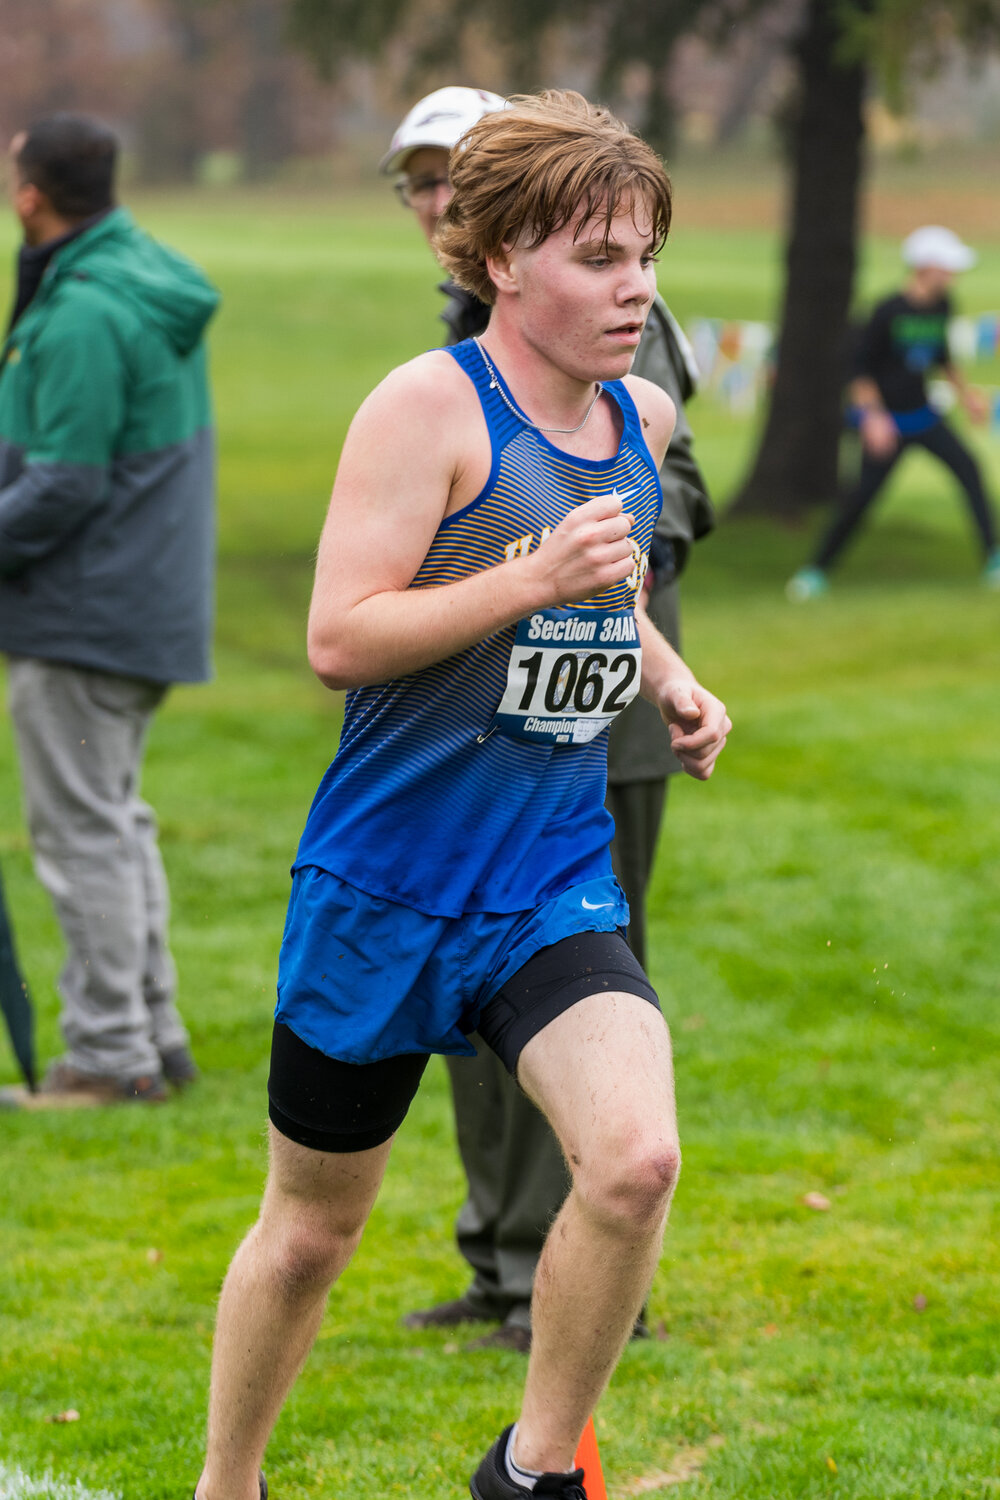 Tristan Herbst was the top Raider boys runner with a time of 16:48.4 that put him 18th in sections, just 4.11 seconds away from going to state.